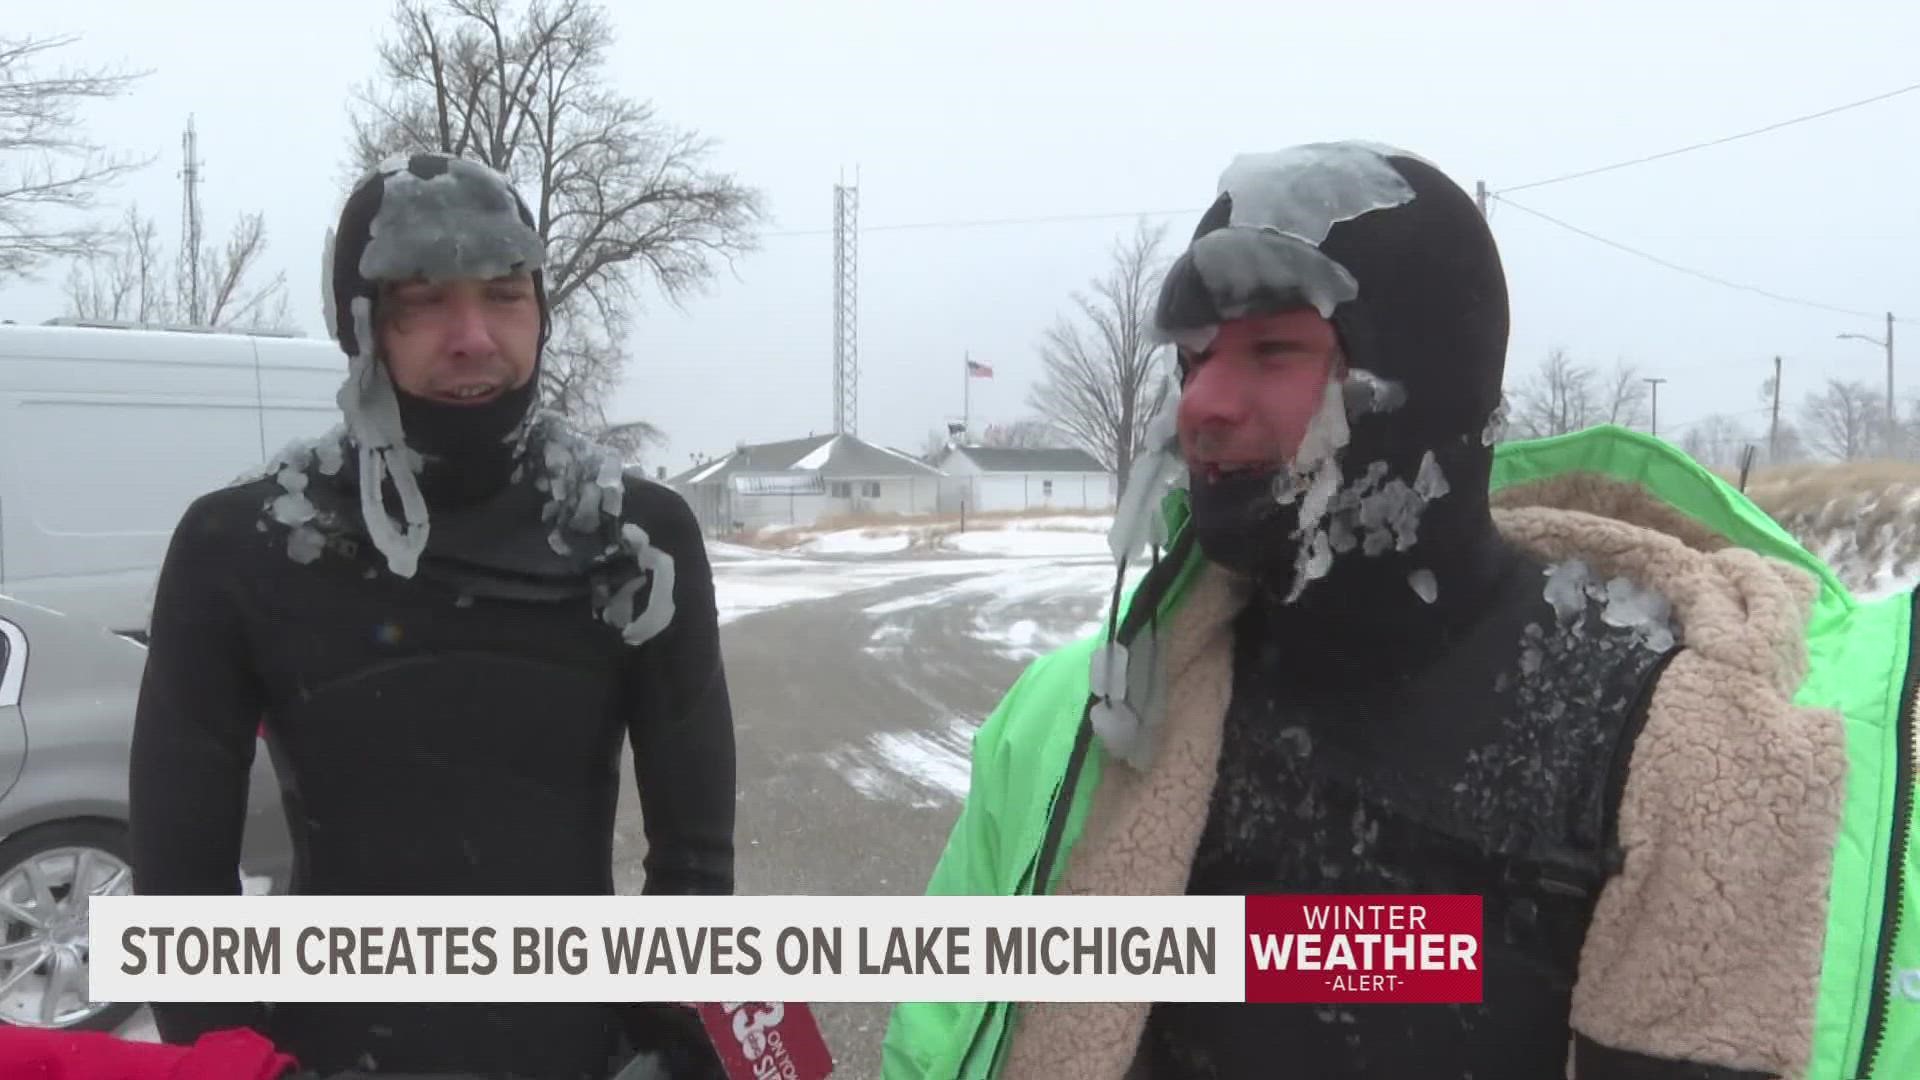 Two surfers braved the blizzard conditions Friday and said the waves on Lake Michigan were the biggest they've ever seen.